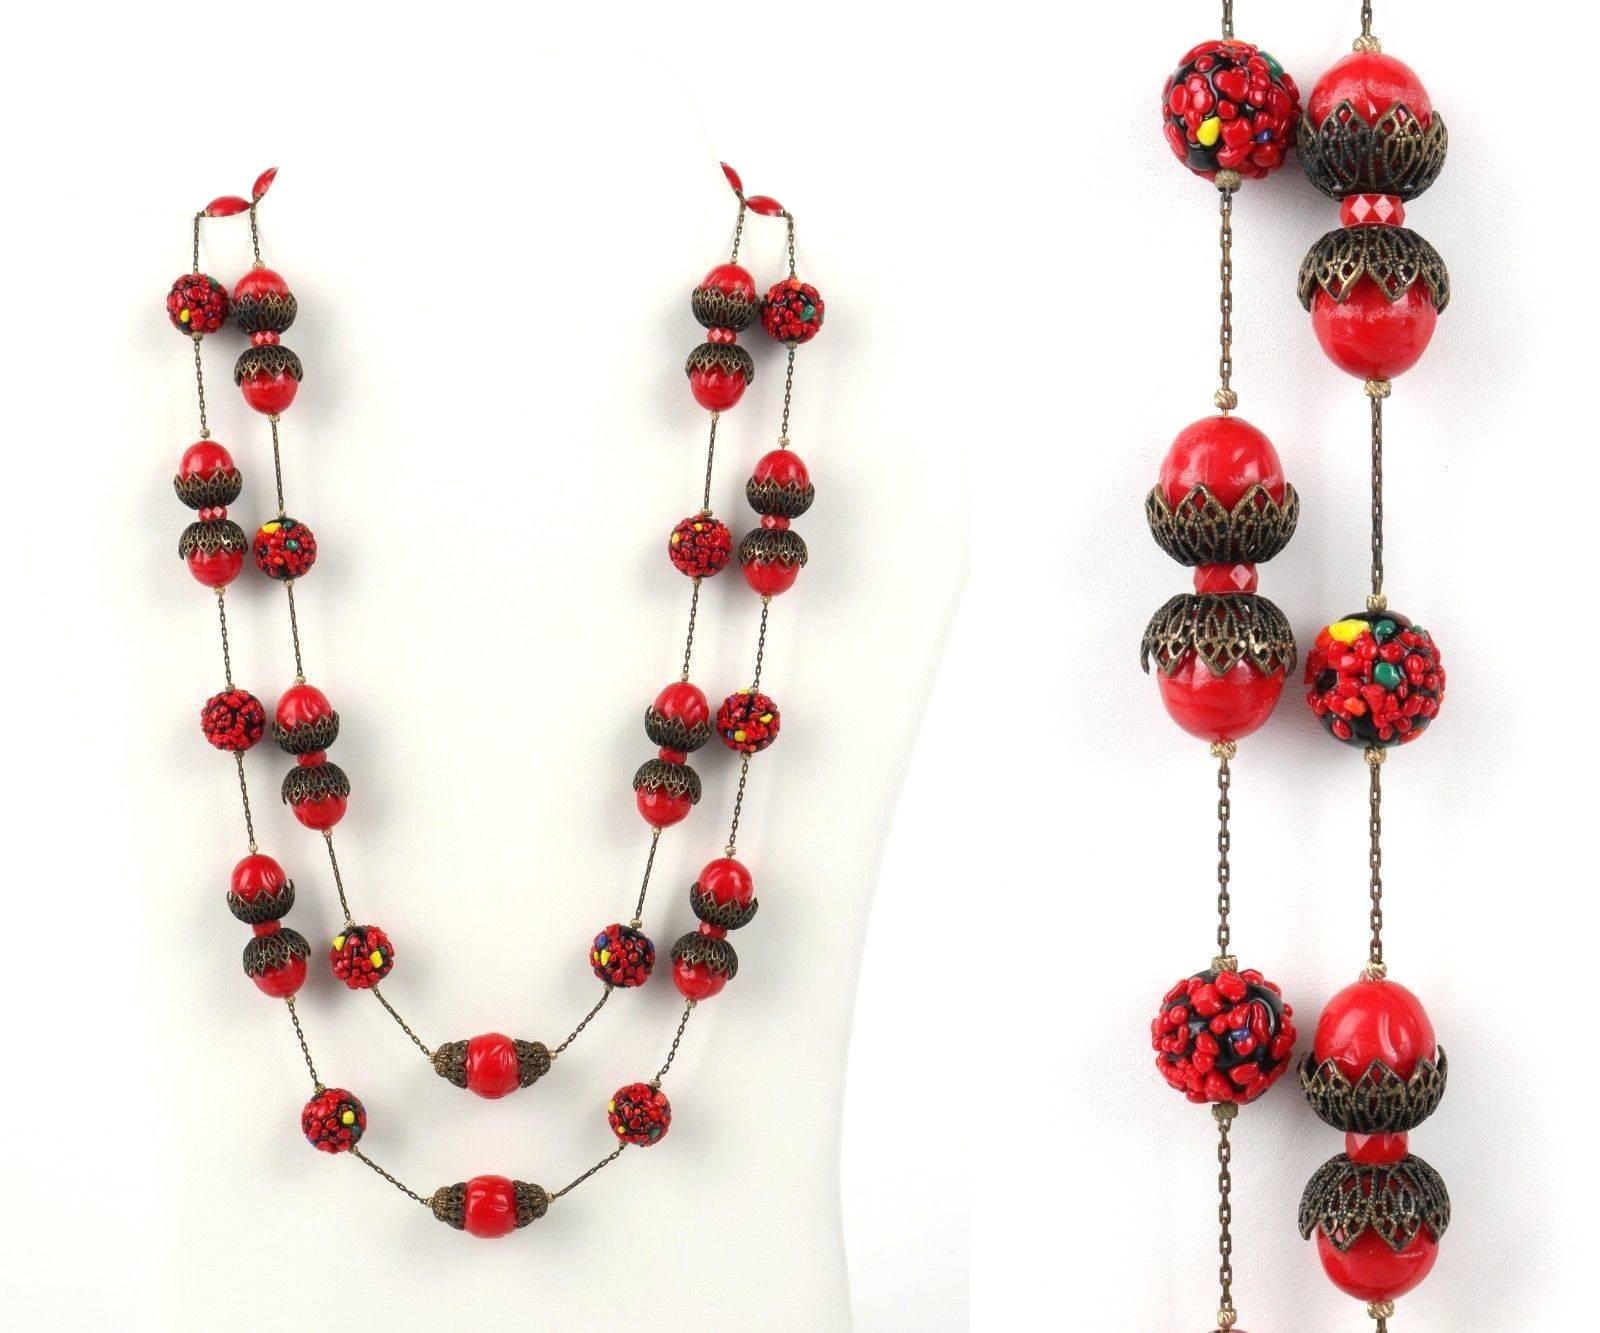 Vintage c.1940's early Alice Caviness bronze tone double chain red confetti glass bead necklace. Fine bronze tone link chain has alternating solid red color beads (measuring approximately 12mm) with large bronze tone filigree caps and black beads